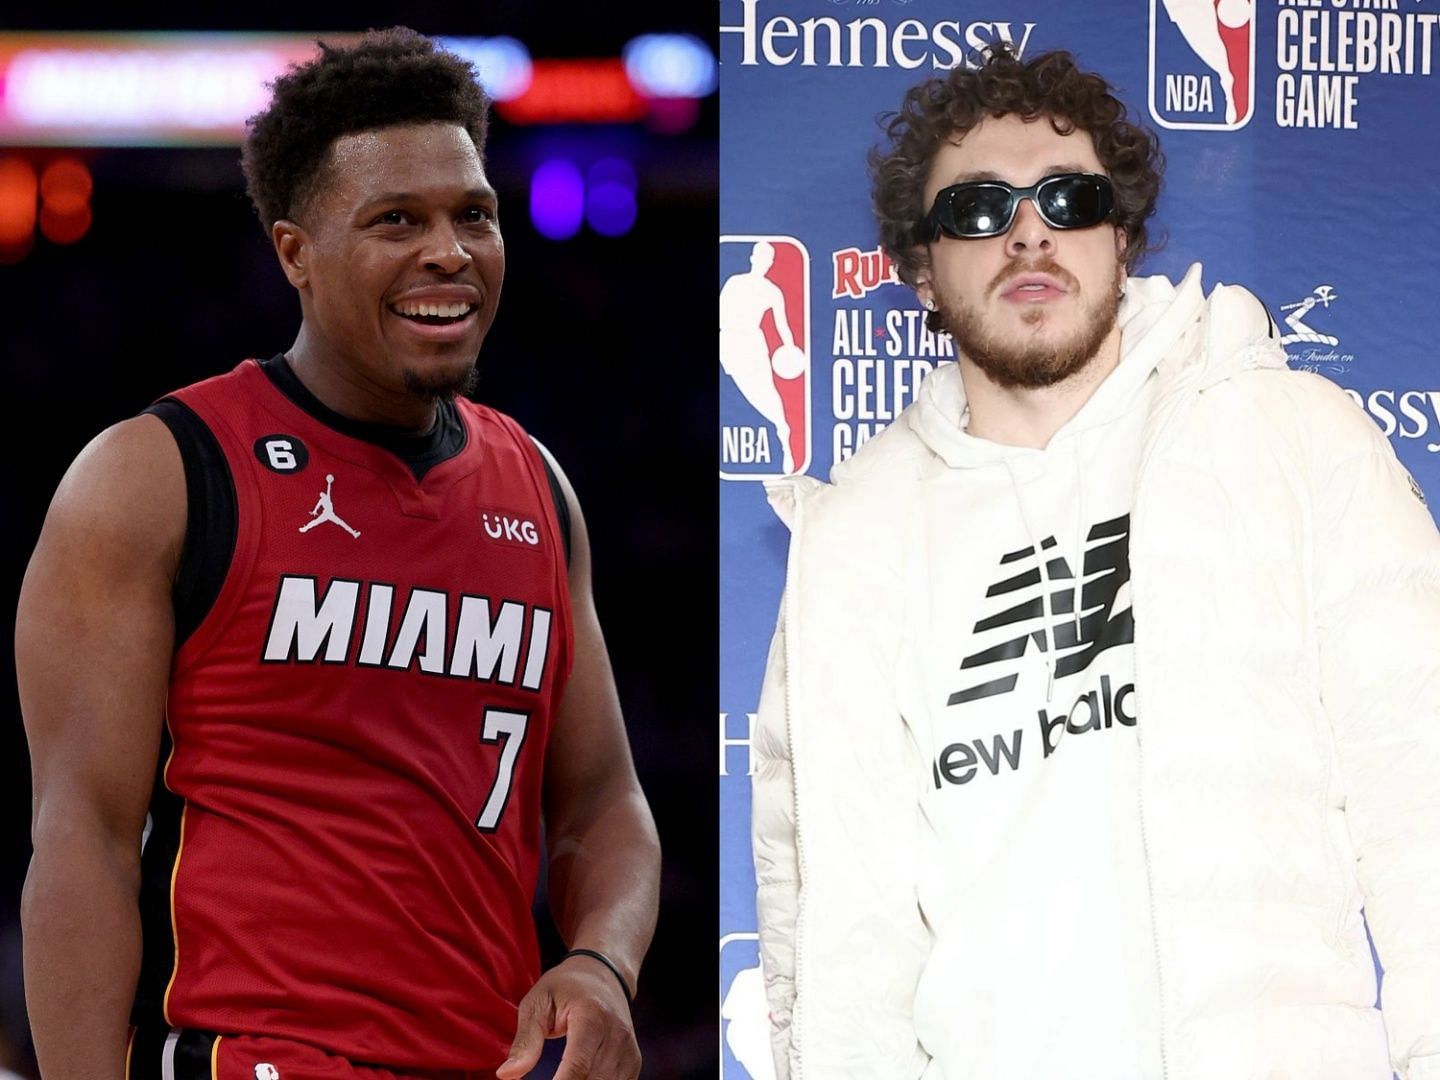 Kyle Lowry of the Miami Heat and rapper Jack Harlow